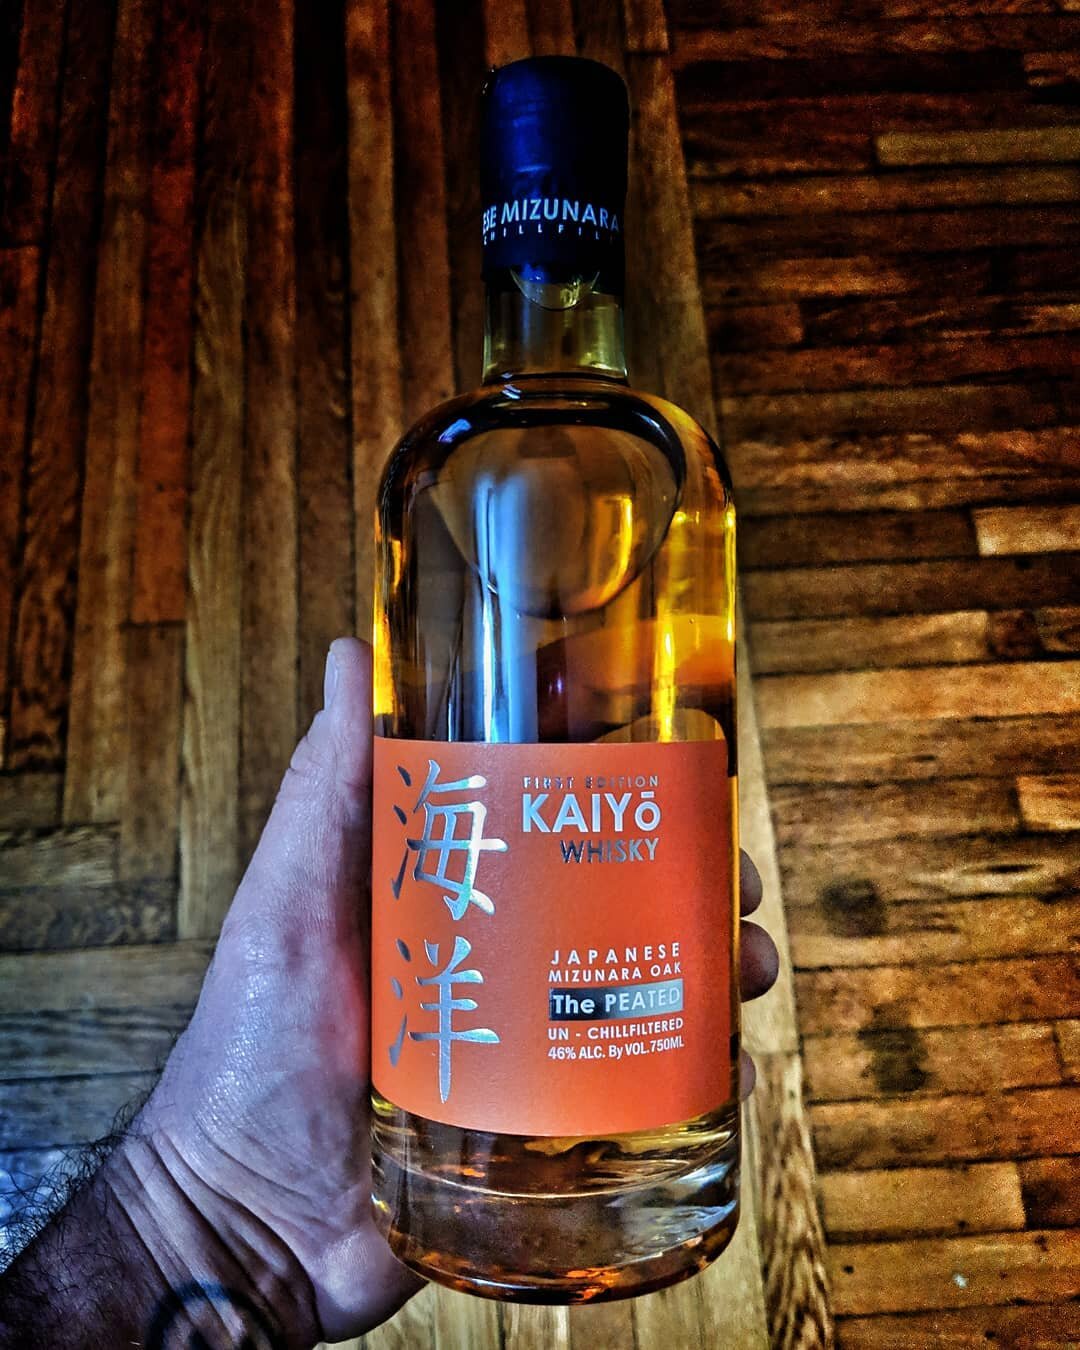 Love this stuff. It is some of the best whisky I've had. Great flavor. The peat is definitely present, but it stays soft on the nose with subtle hints of spice with a particular restrained oak note along with floral scents. The oak hits first on the 